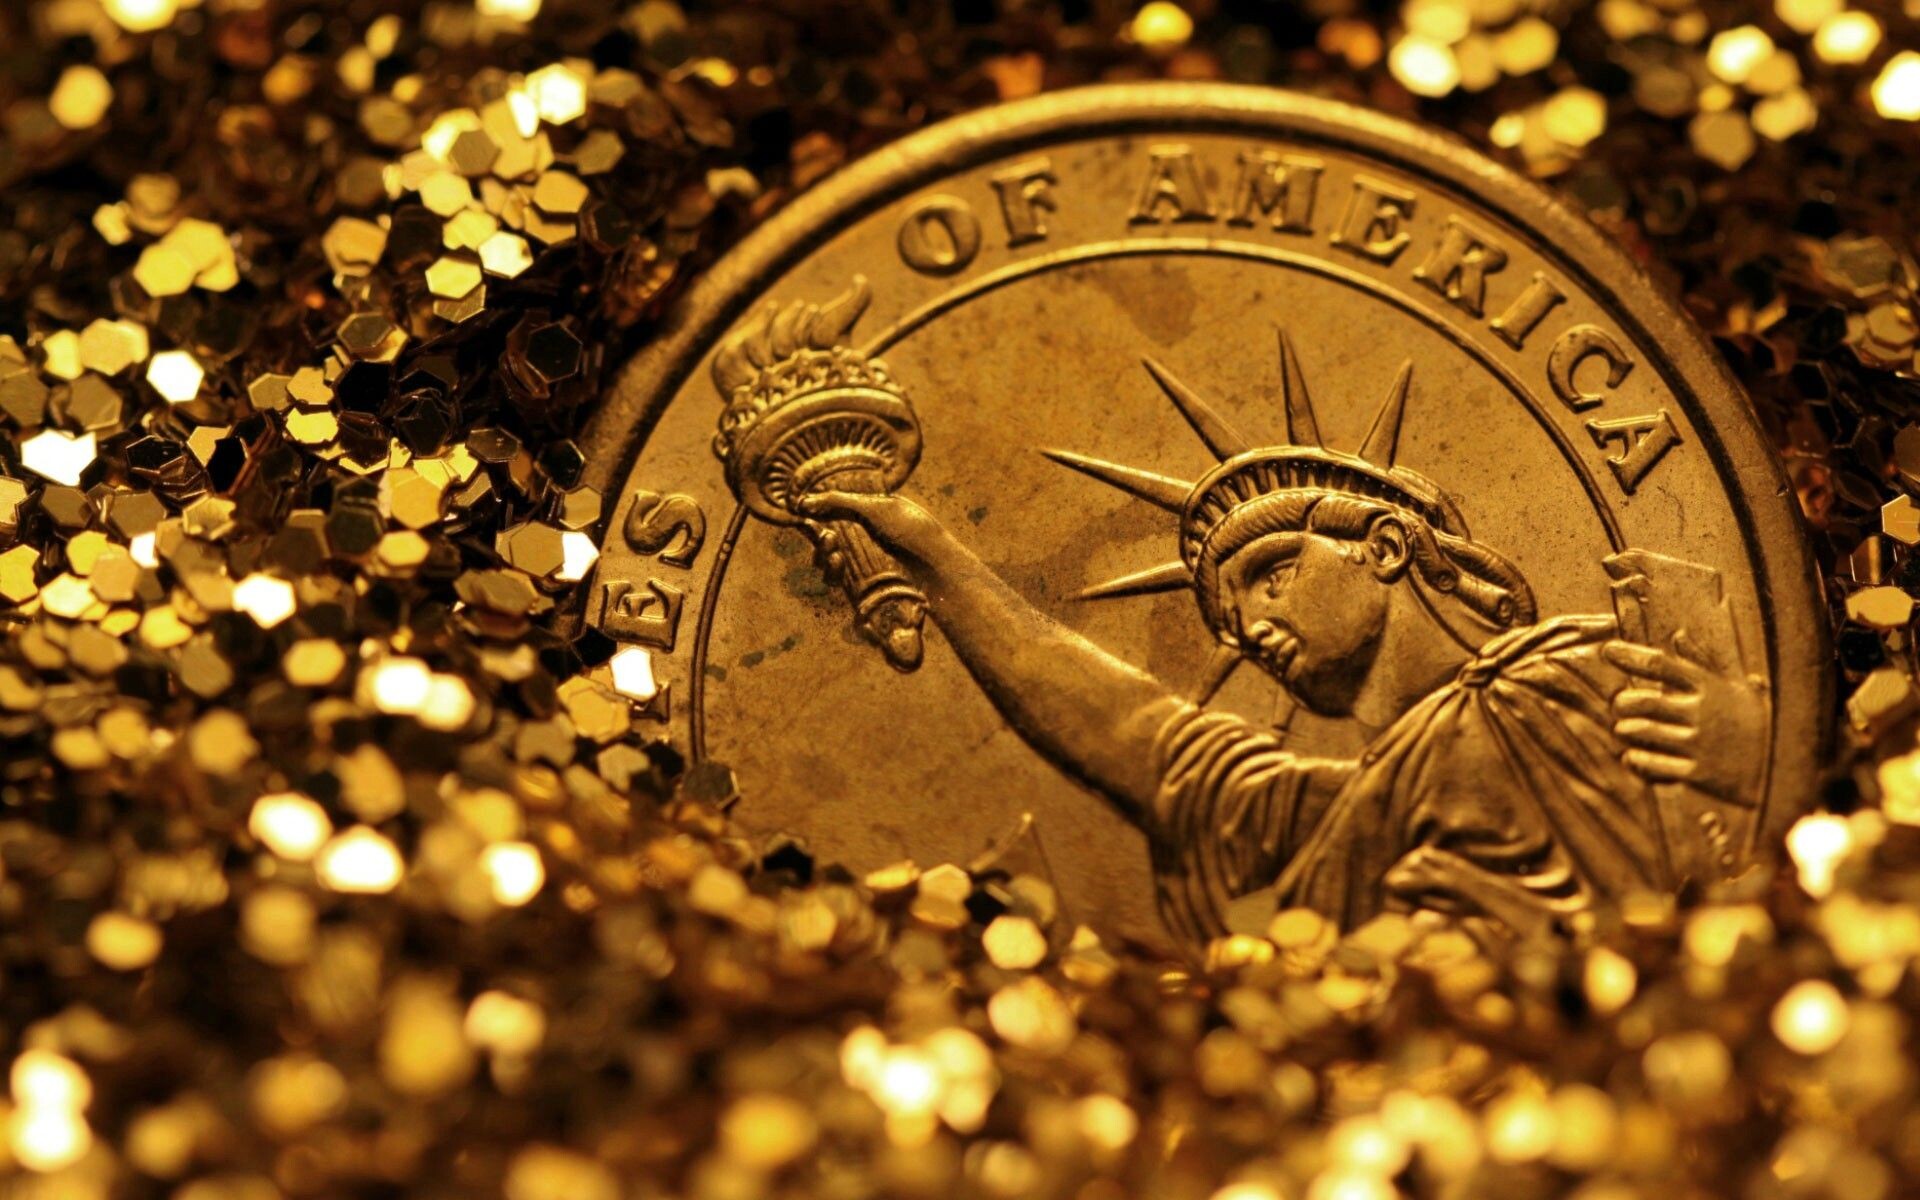 Gold Coins: American money, Presidential one dollar coin with The Statue of Liberty on reverse. 1920x1200 HD Wallpaper.